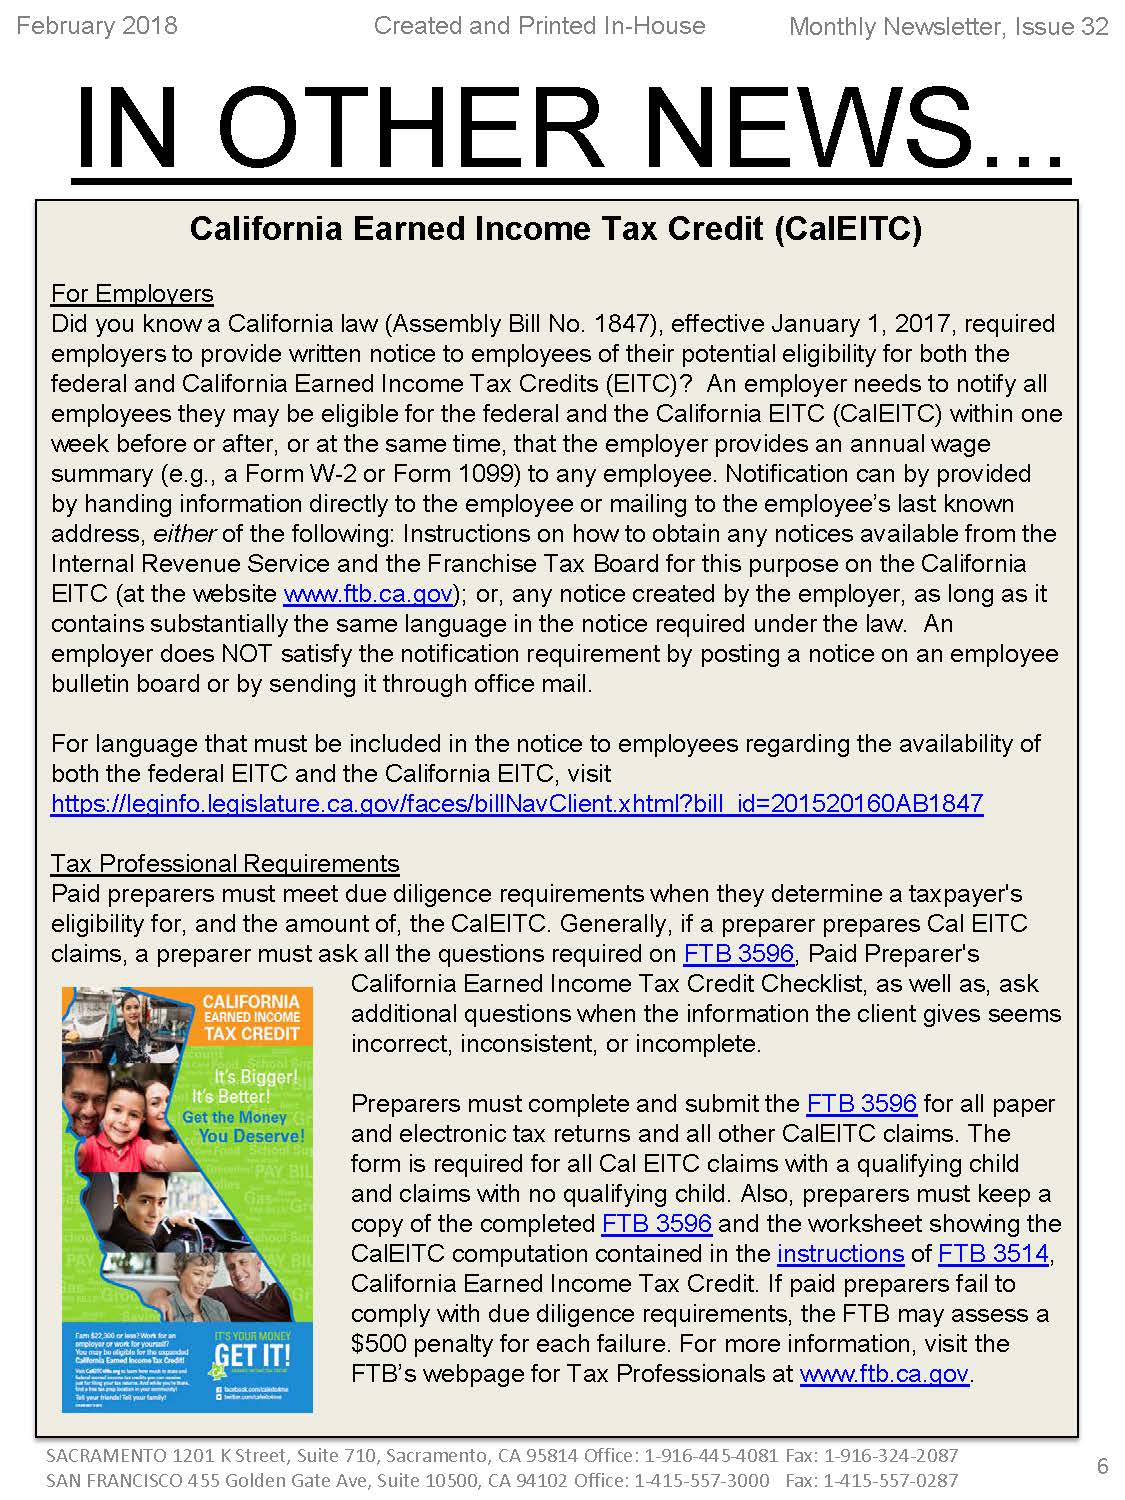 california-earned-income-tax-credit-caleitc-hr-ledger-inc